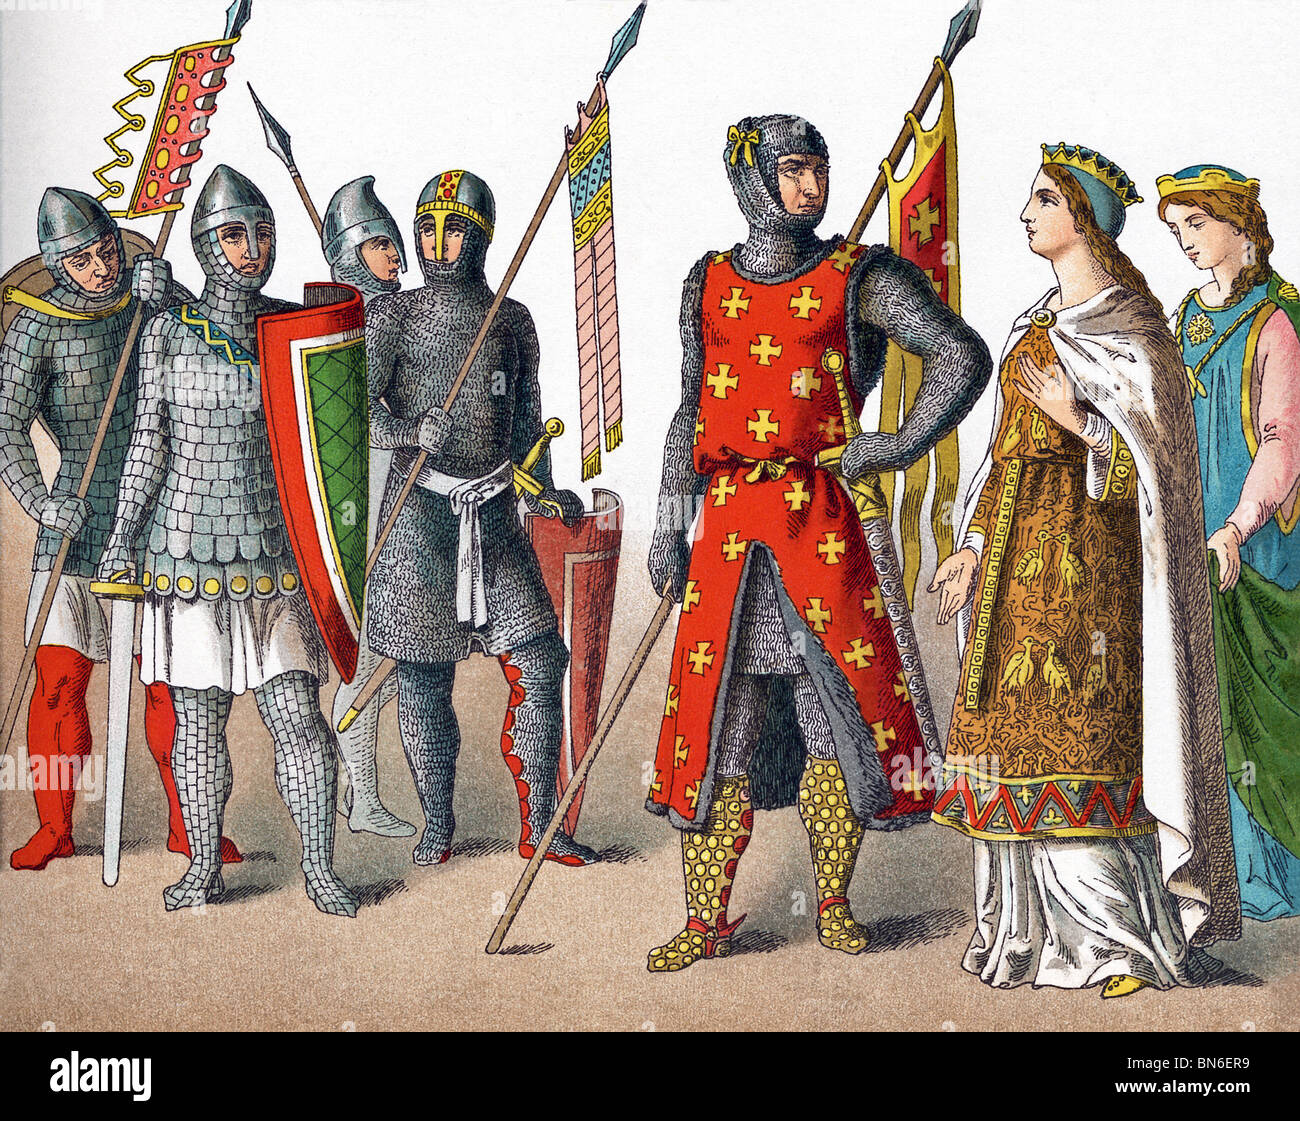 The figures shown here represent Germans around A.D. 1100. They are from left to right: five warriors and two princesses. Stock Photo